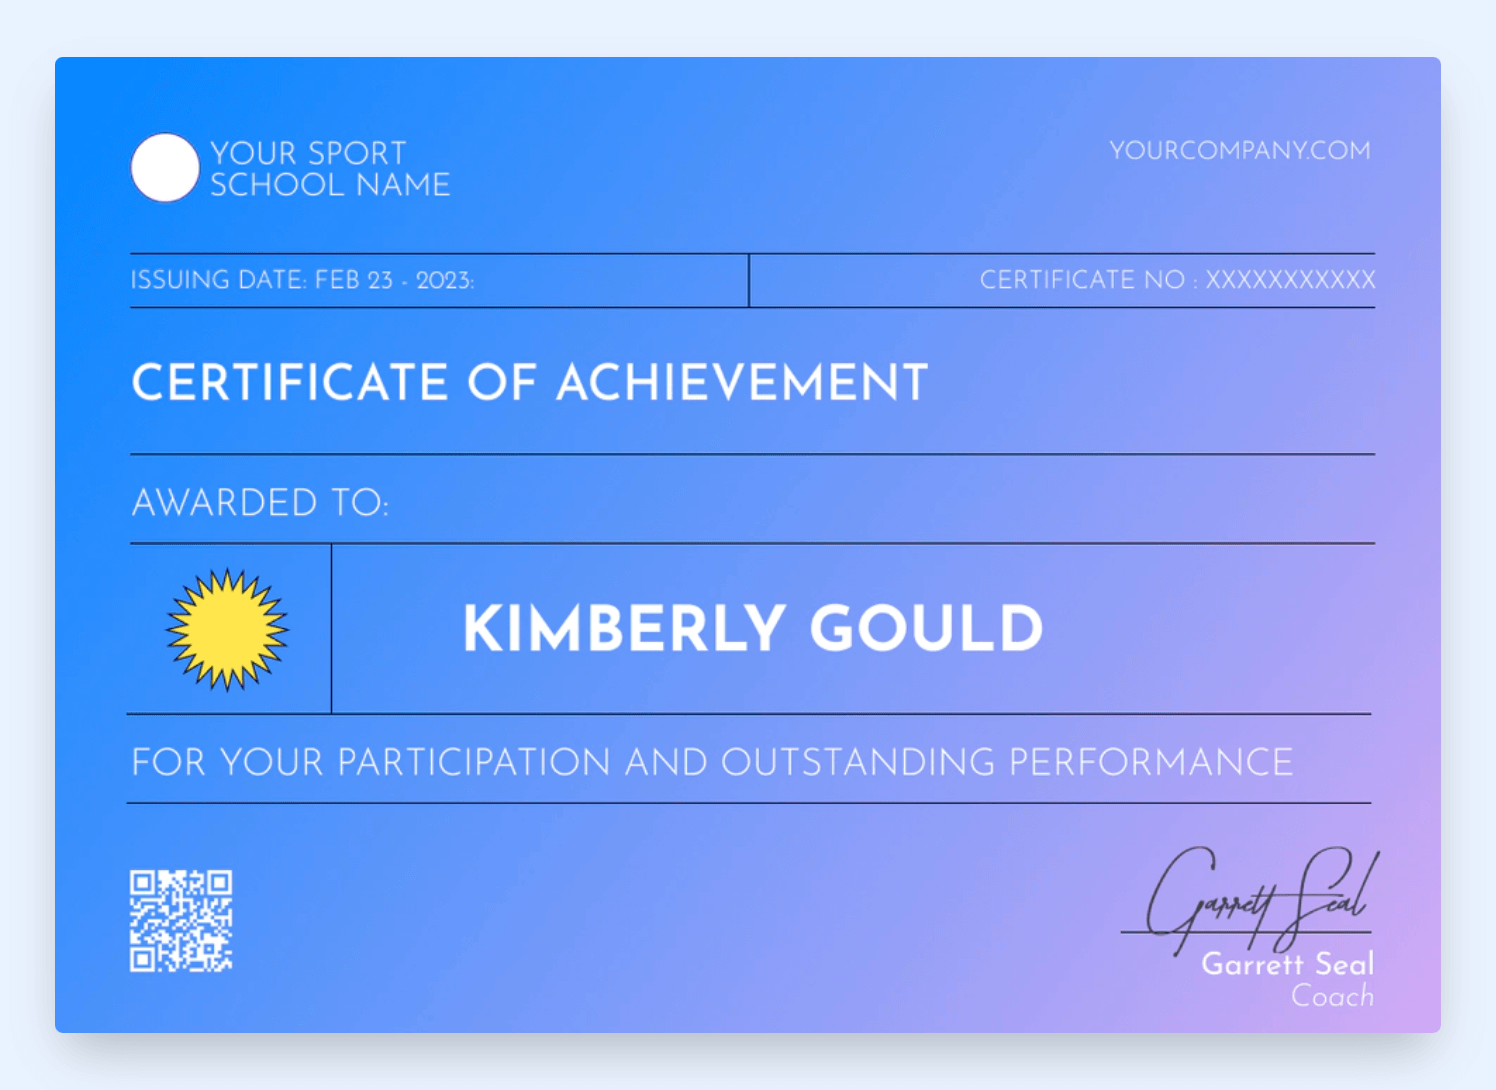 Certificate of achievement with colorful elements from Certifier templates library.